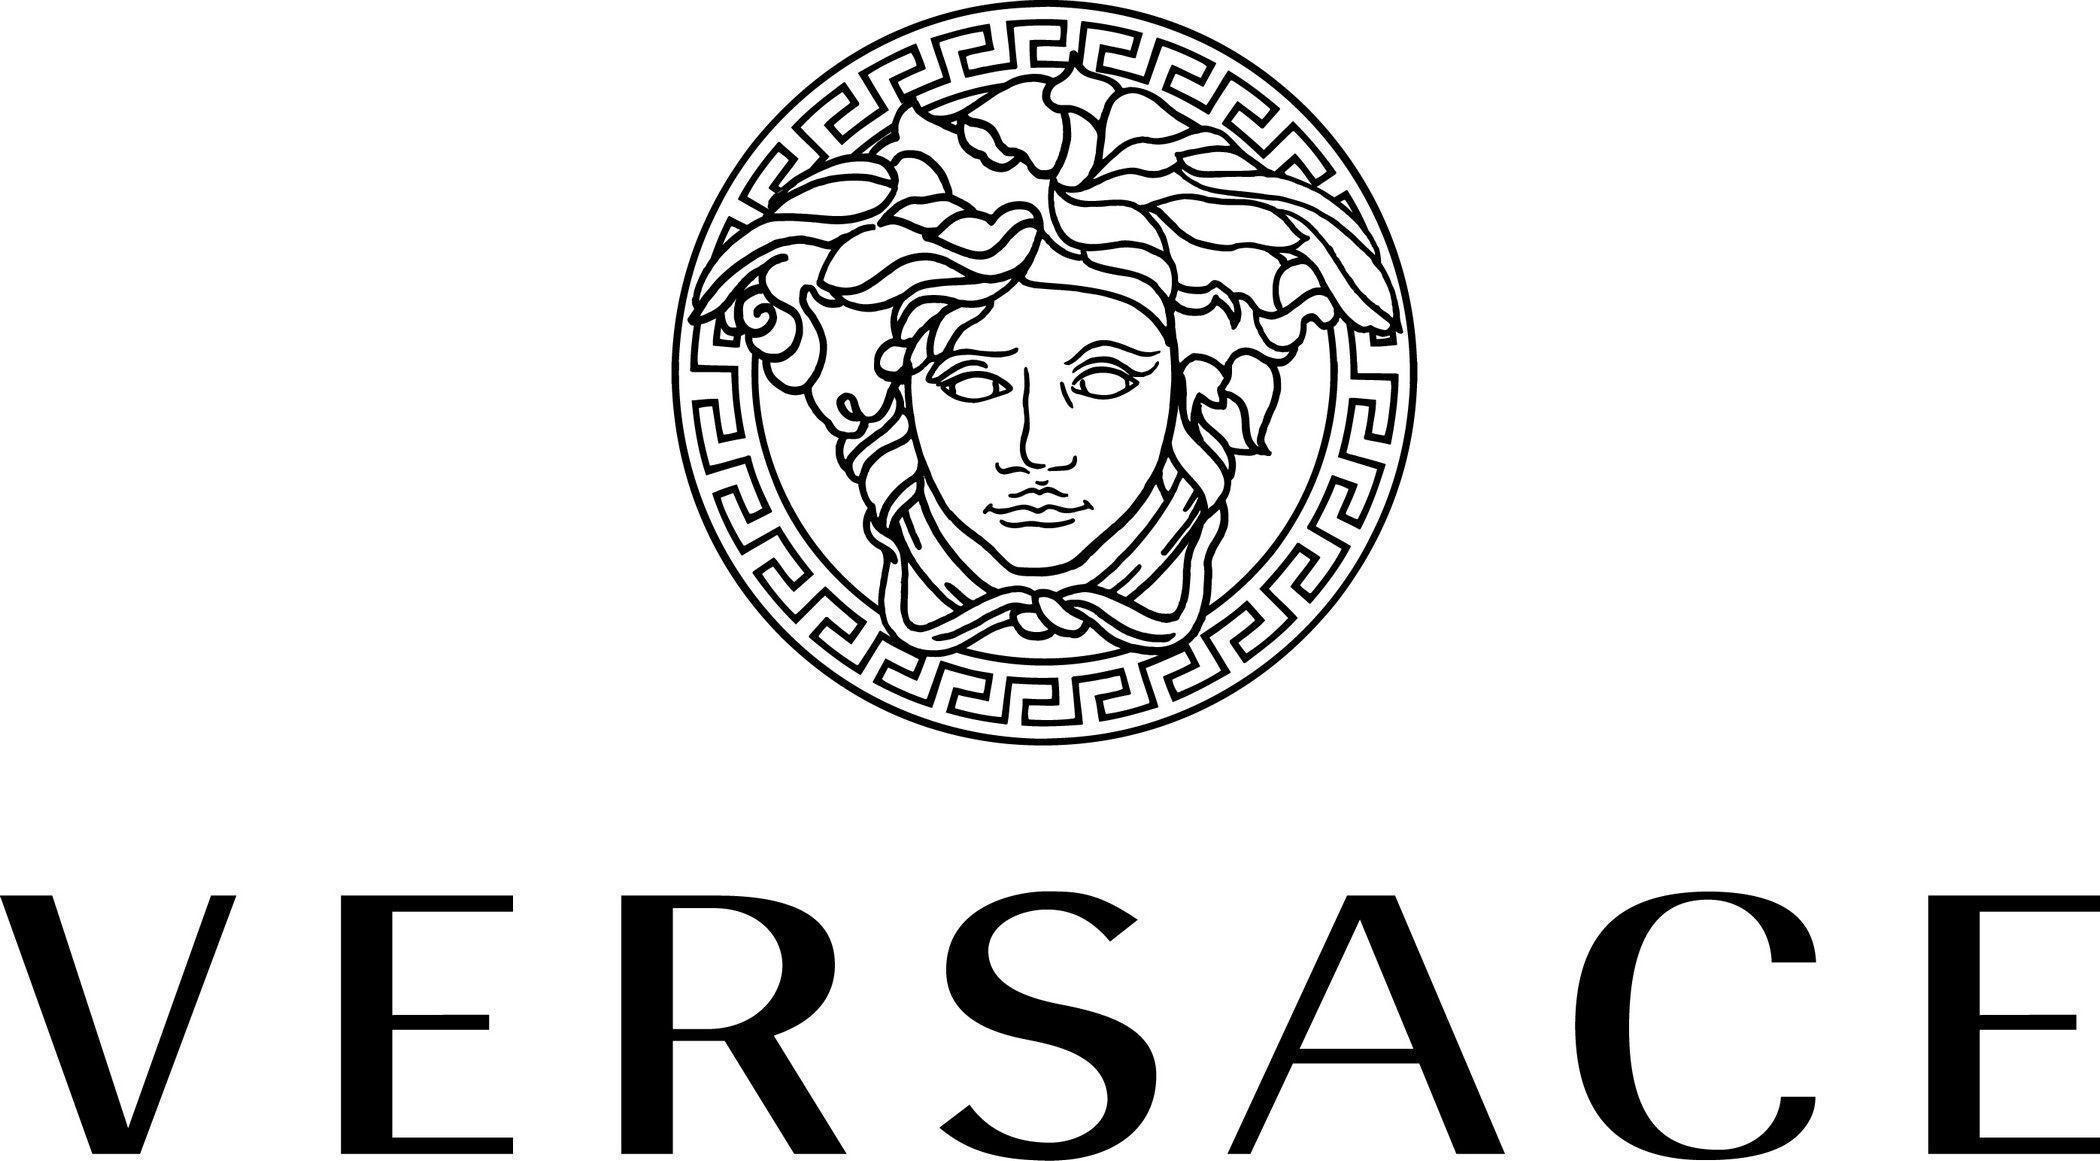 Fashion clothes from Versace wallpaper and image